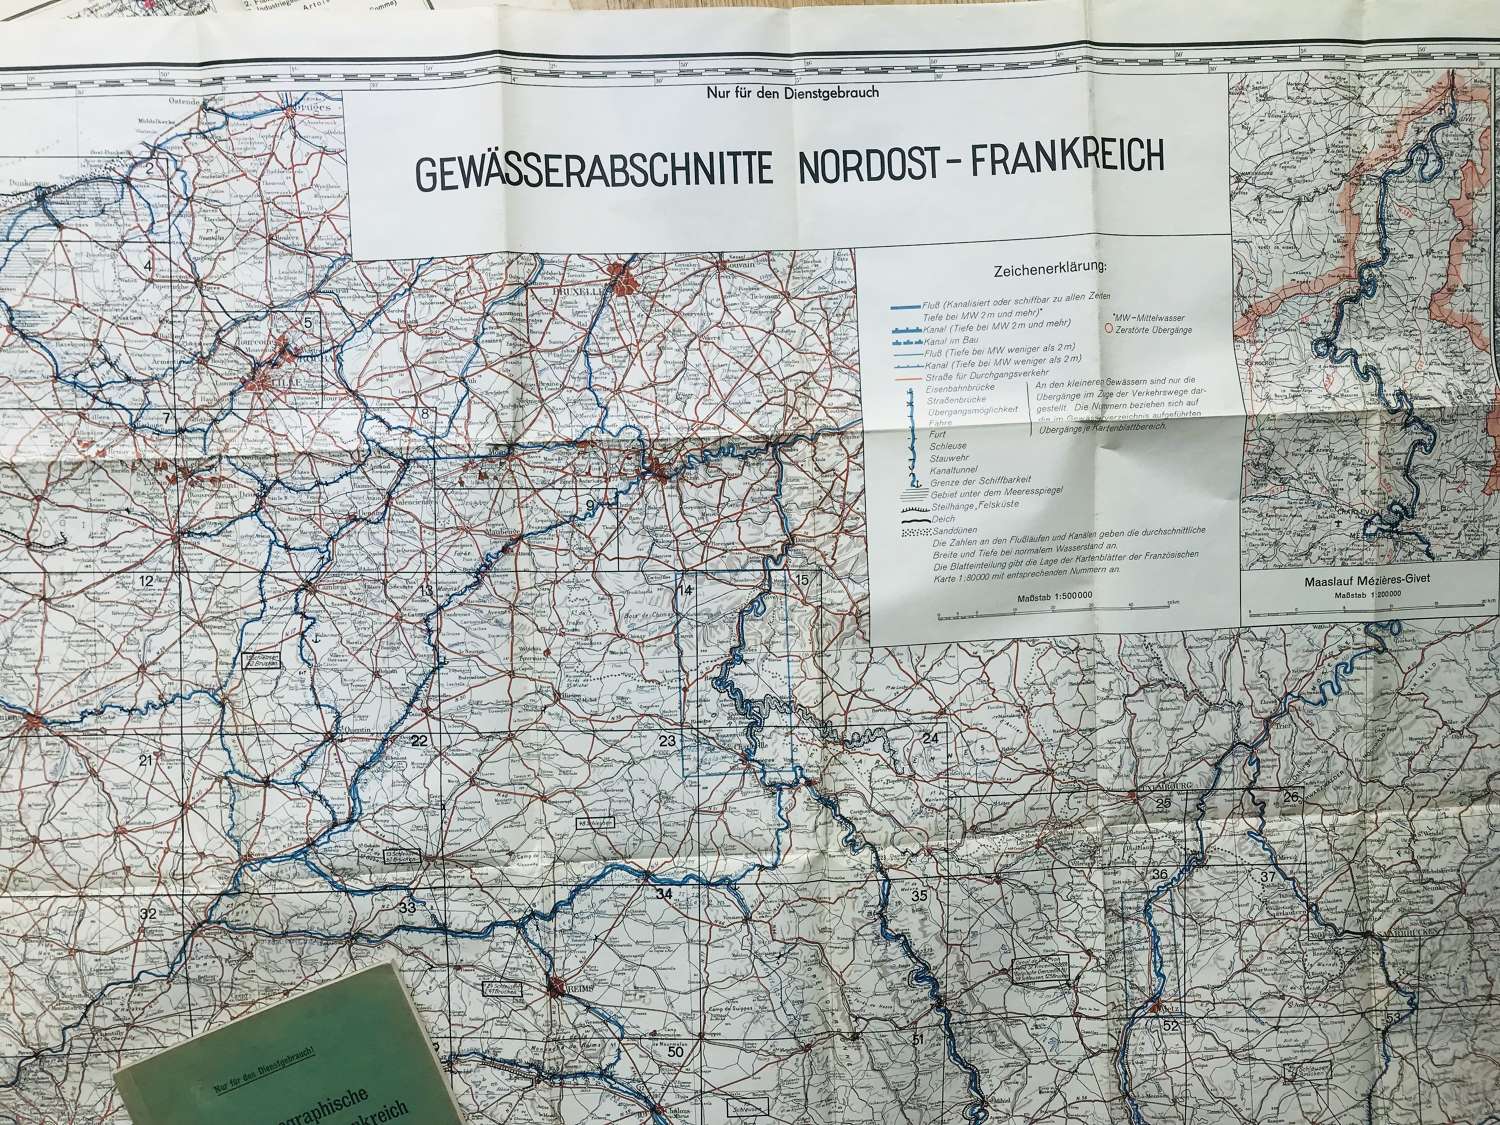 German maps of northern France dated 1940